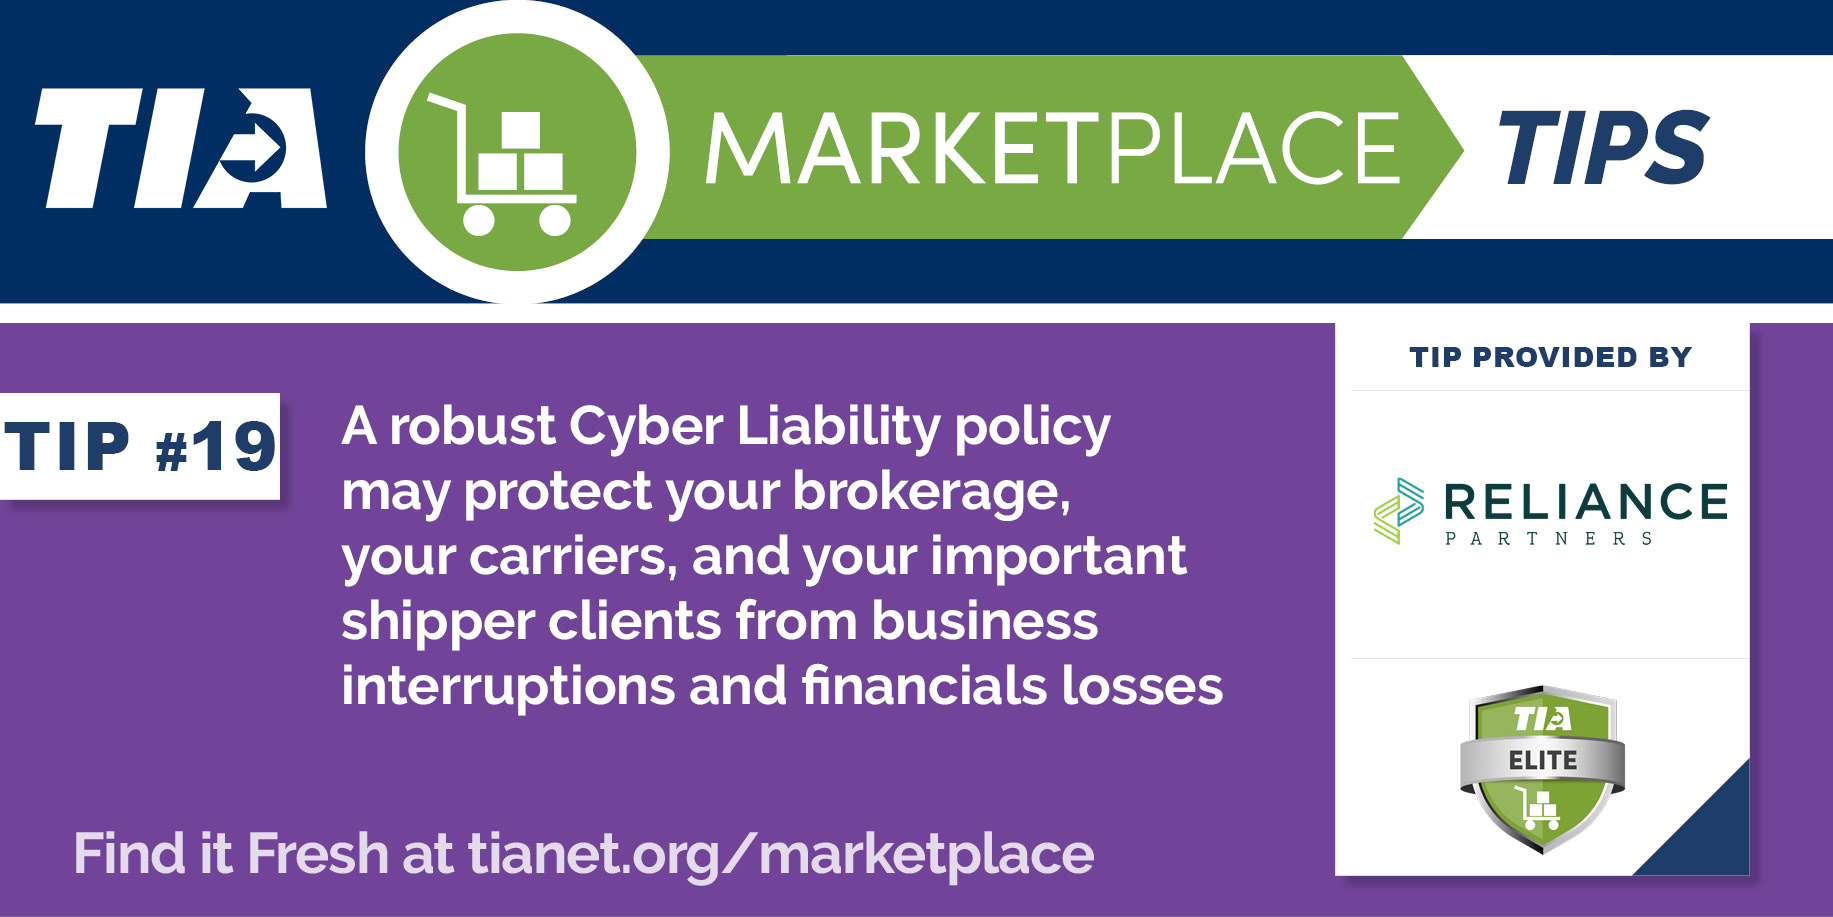 019-A Cyber Liability Policy May Protect Your Broerage